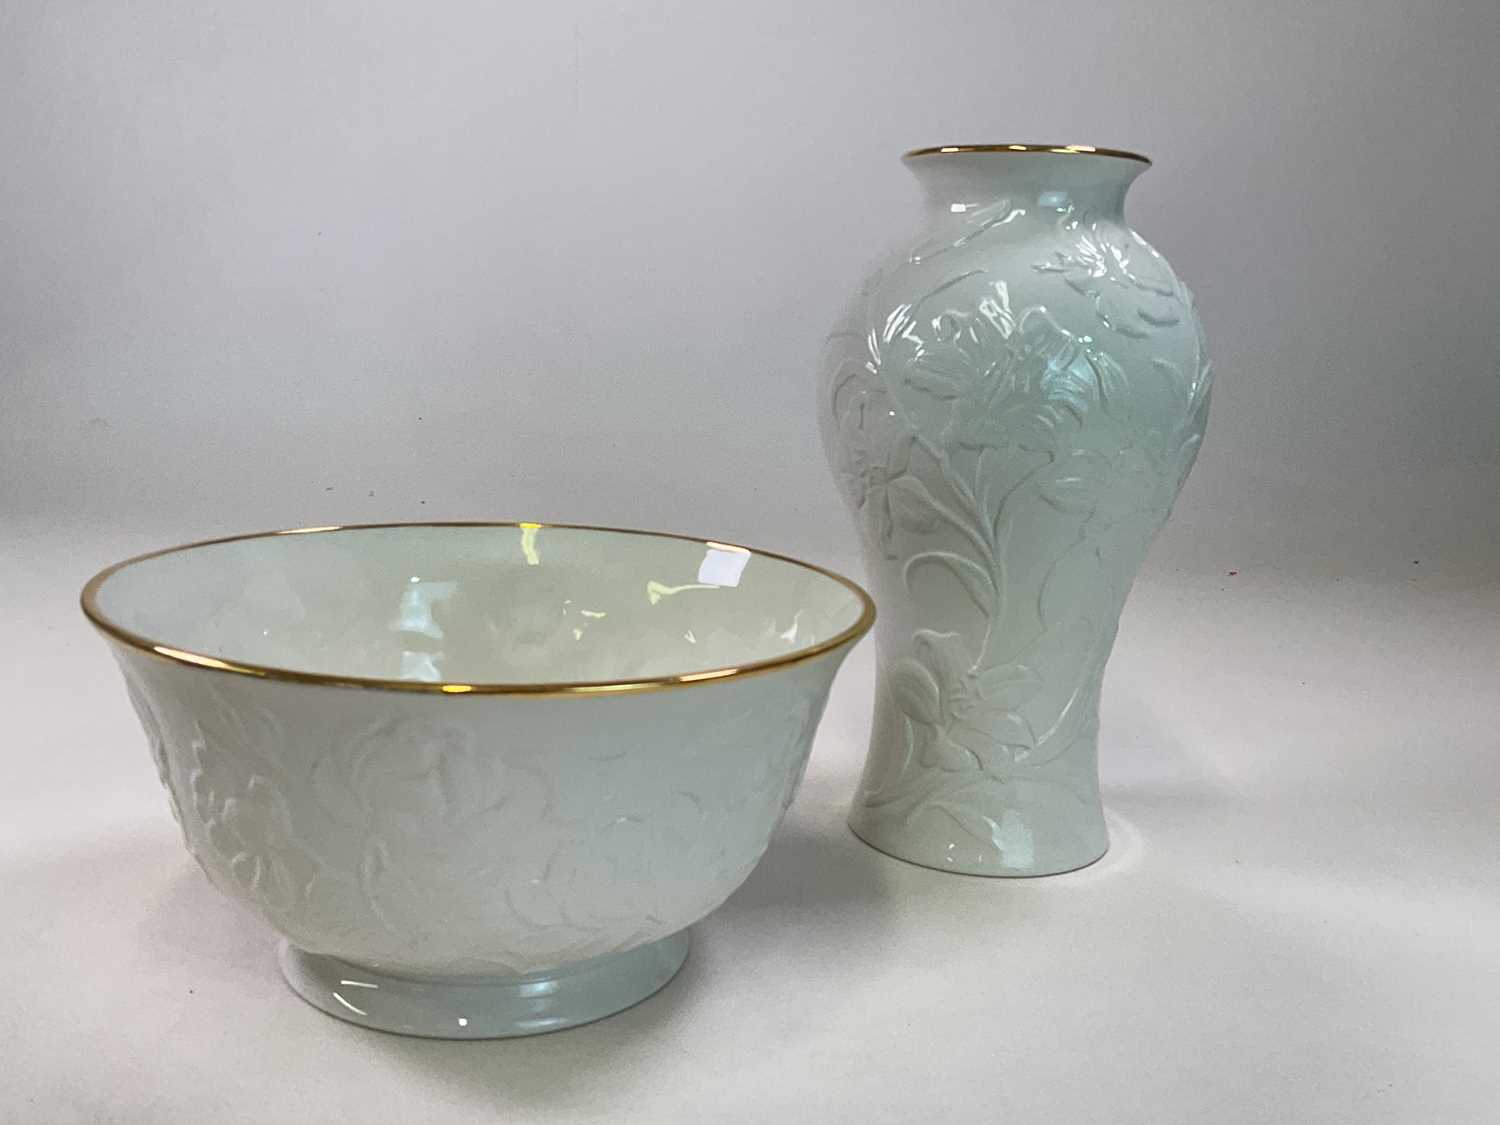 WATERFORD CERAMICS; a white Lotus Vase and bowl with gilded rims and printed mark to base, vase